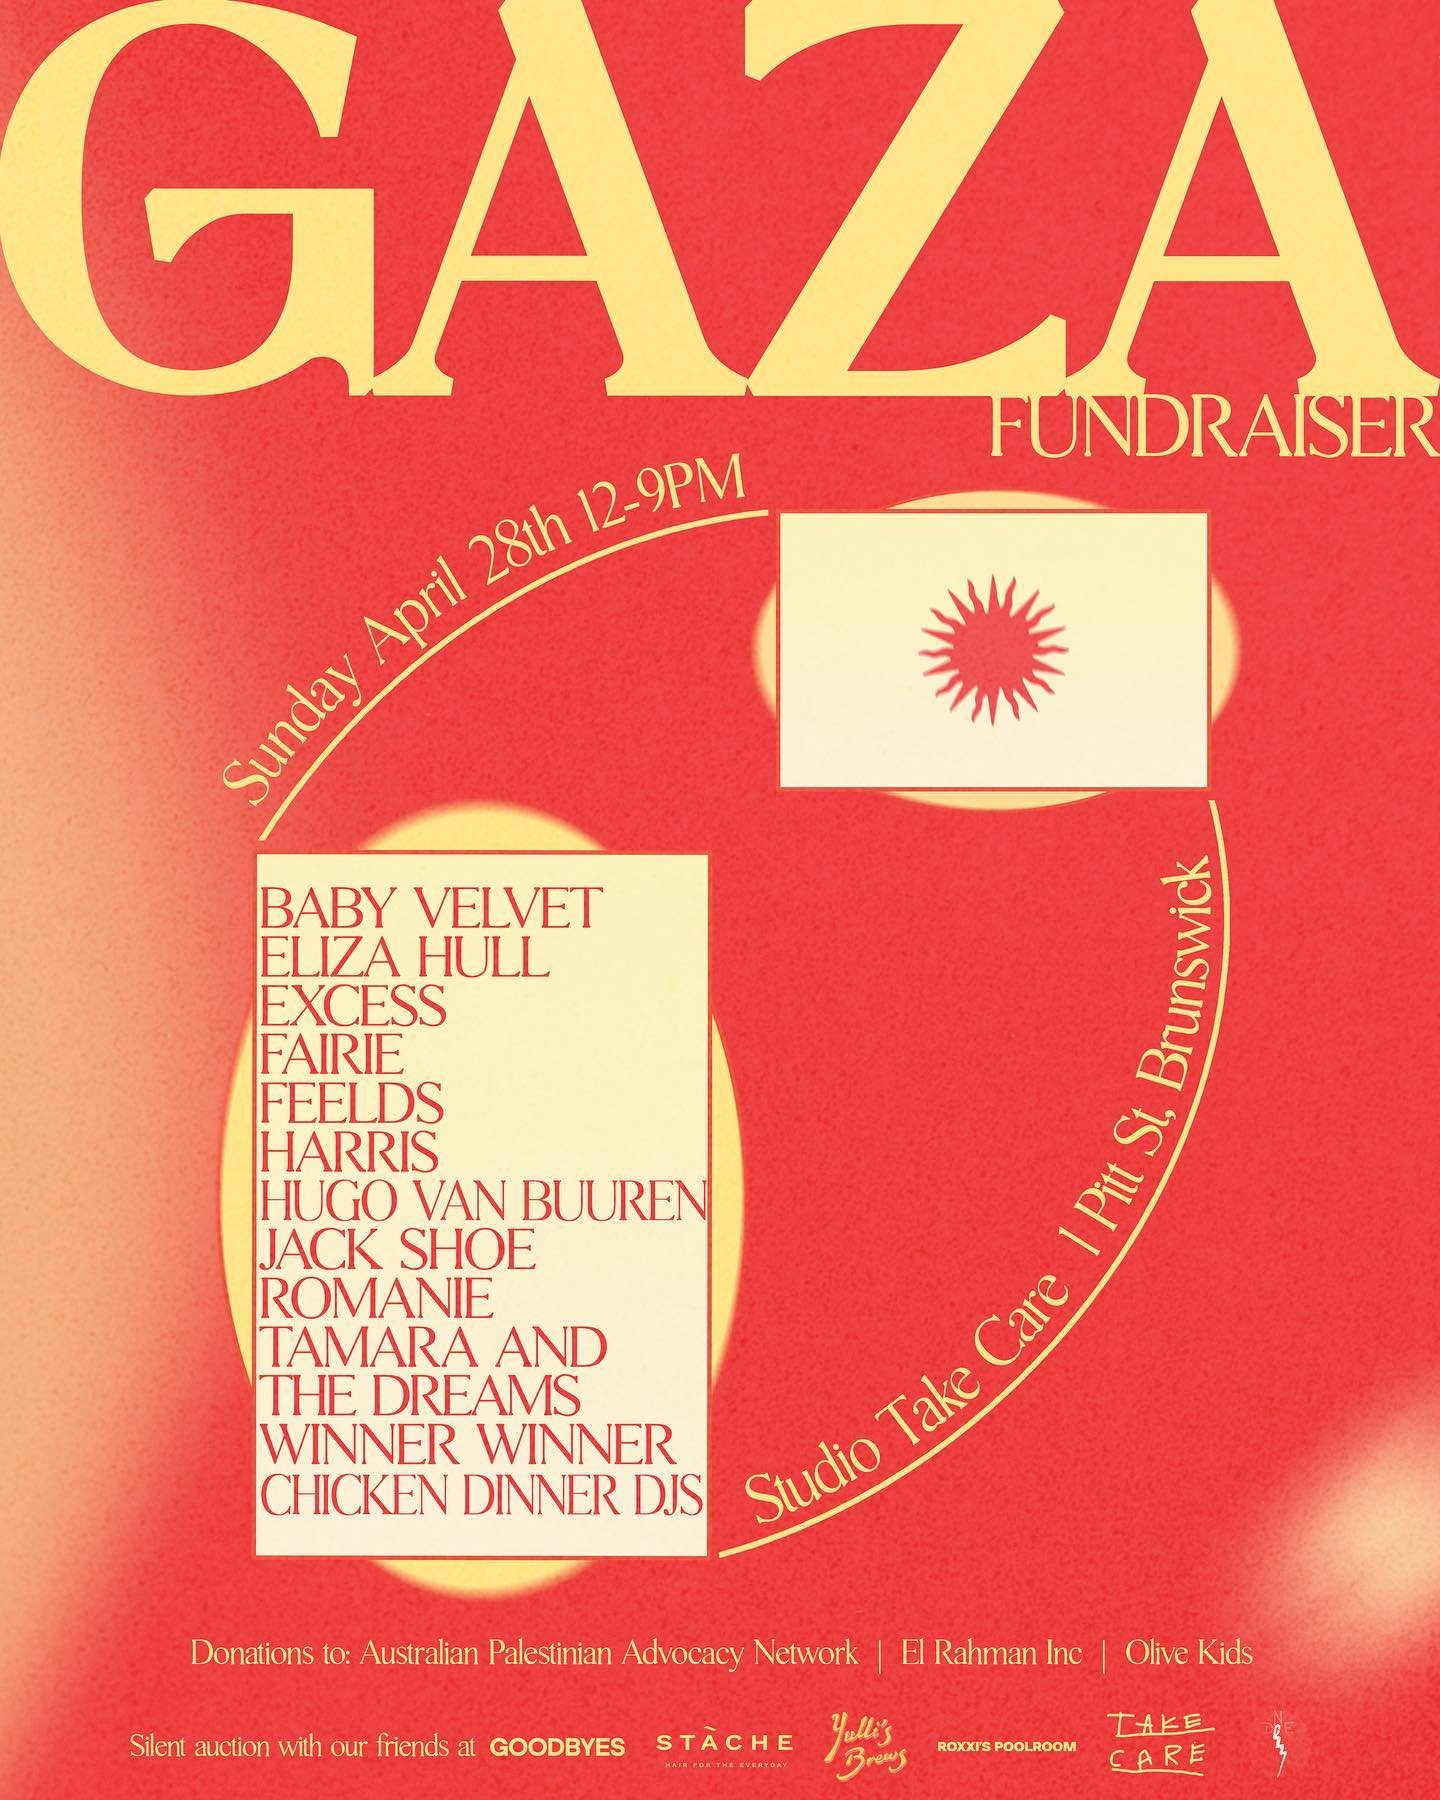 On Sunday 28th of April we&rsquo;re playing and helping to organise a fundraiser event for Gaza together with a small group of Naarm music friends who stand in solidarity with people suffering from the violence and ongoing humanitarian crisis happeni